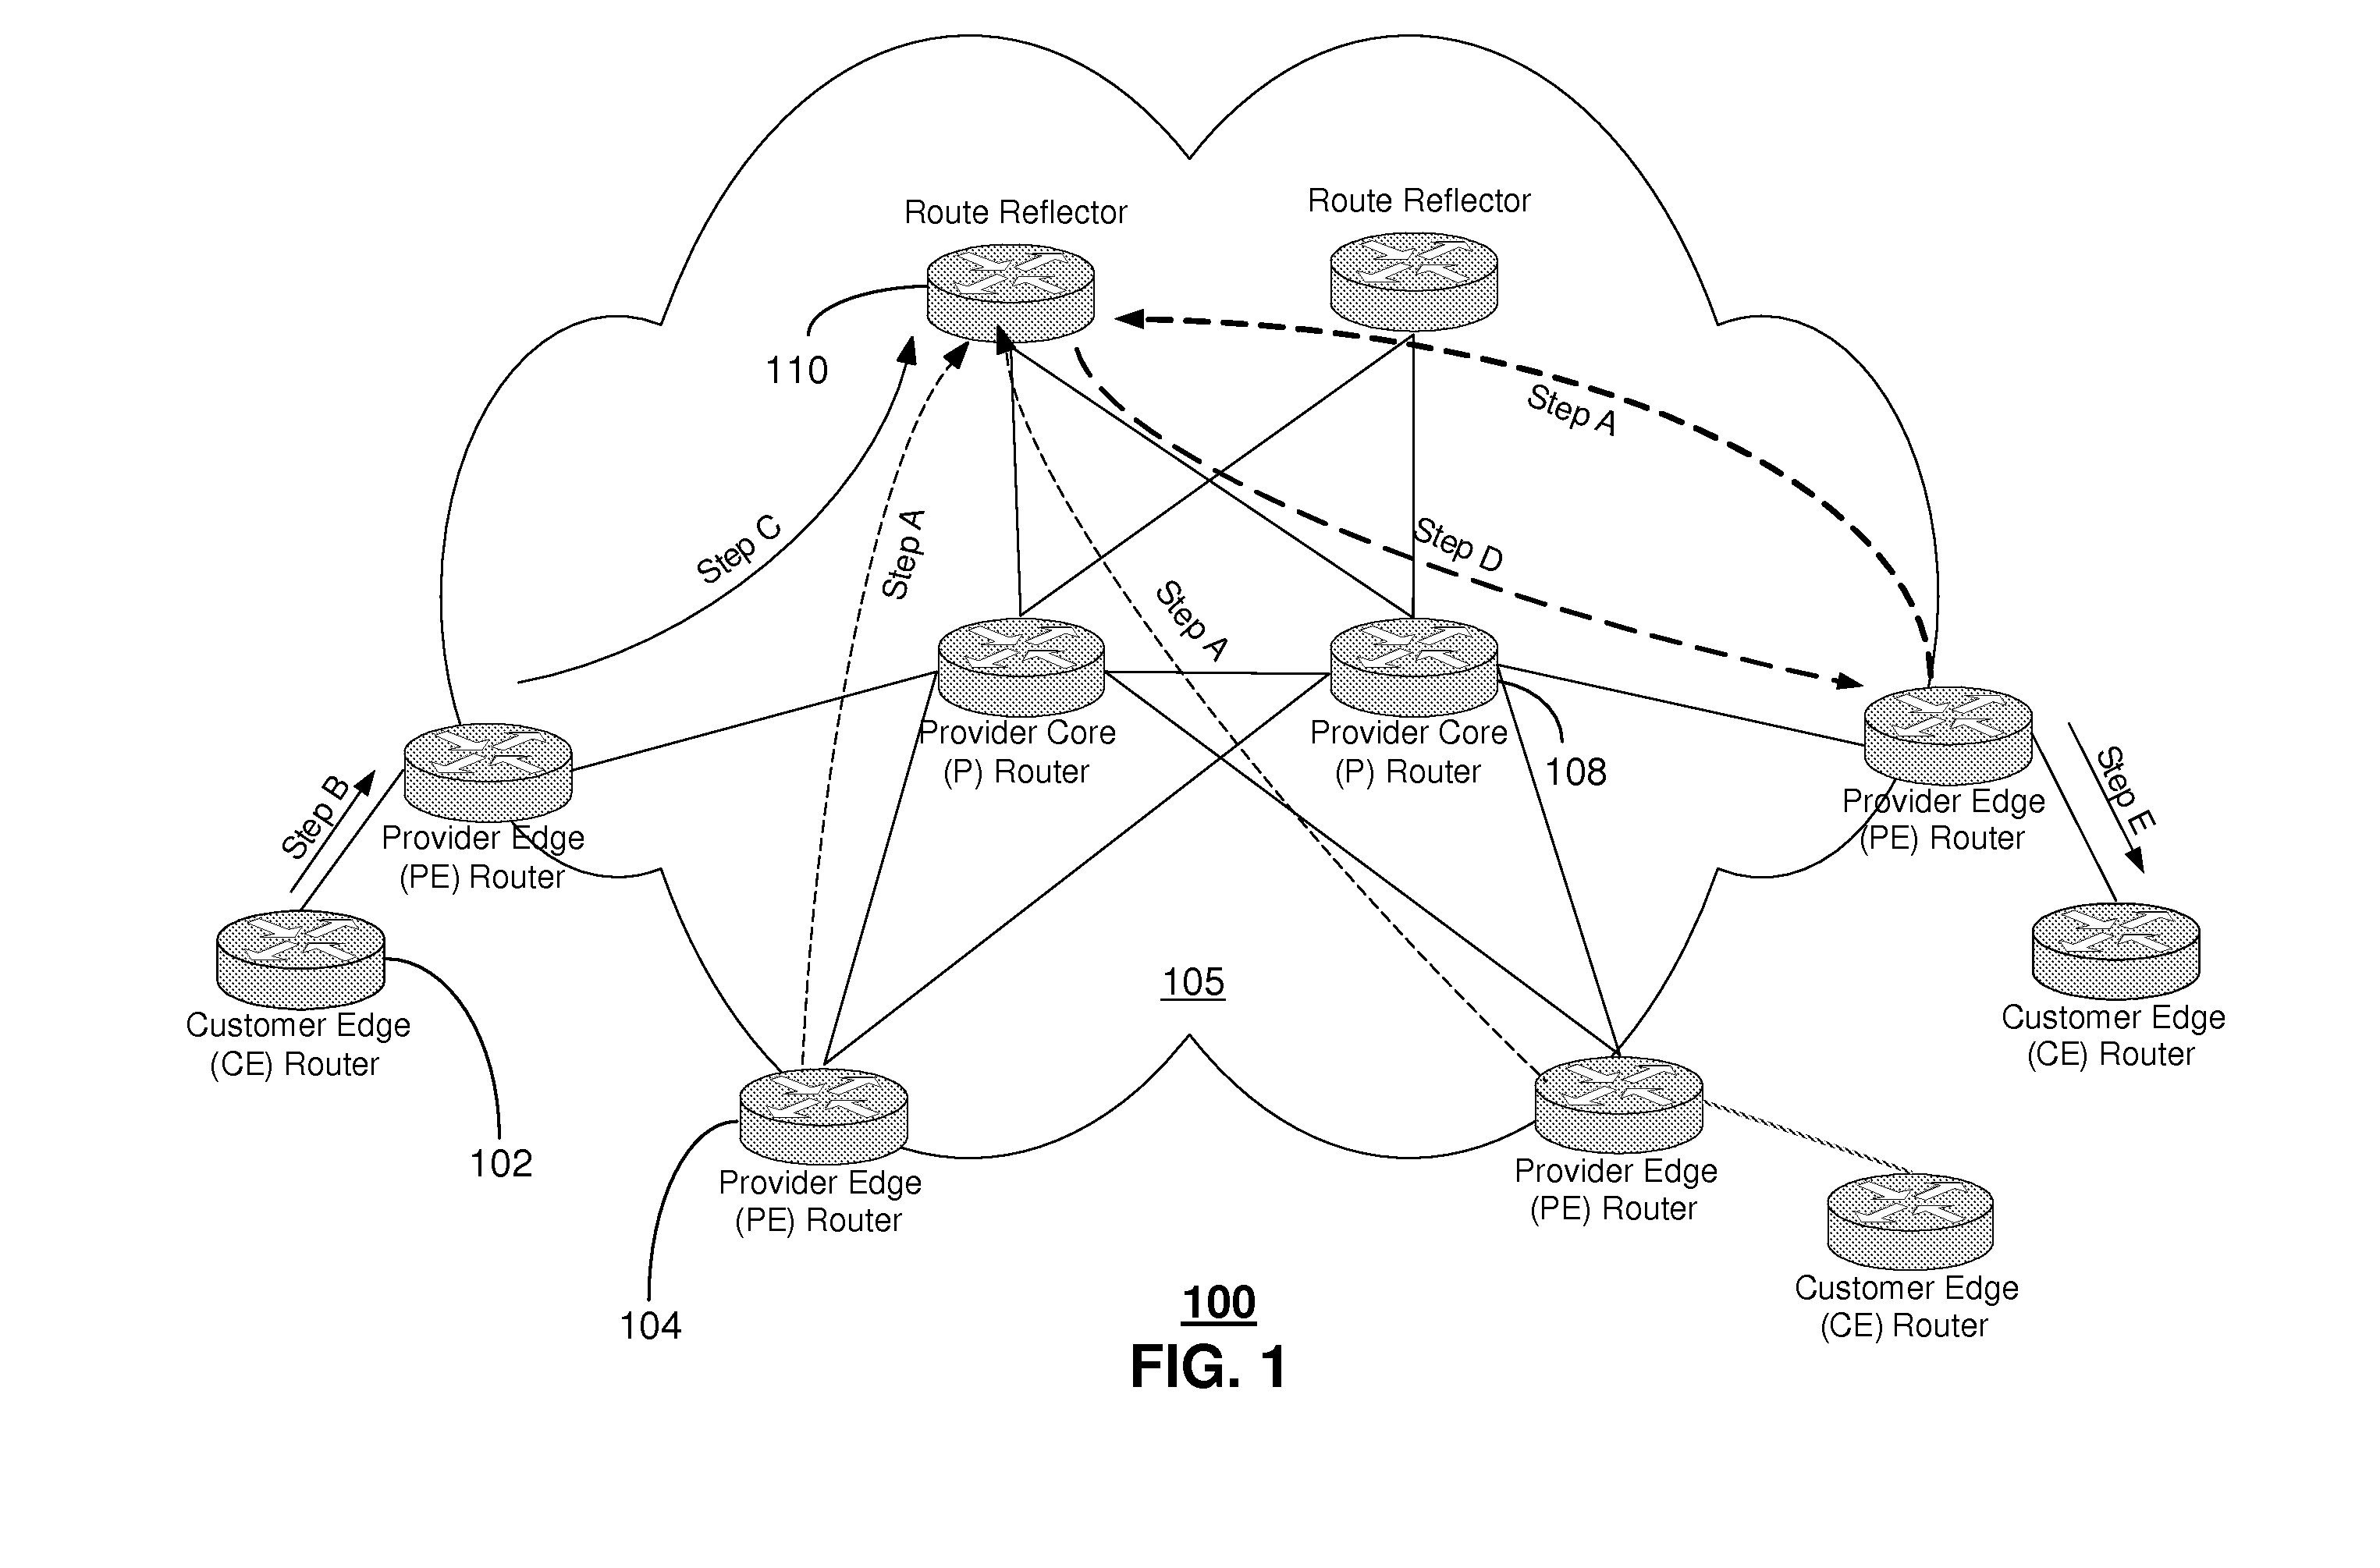 System and method for filtering routing updates